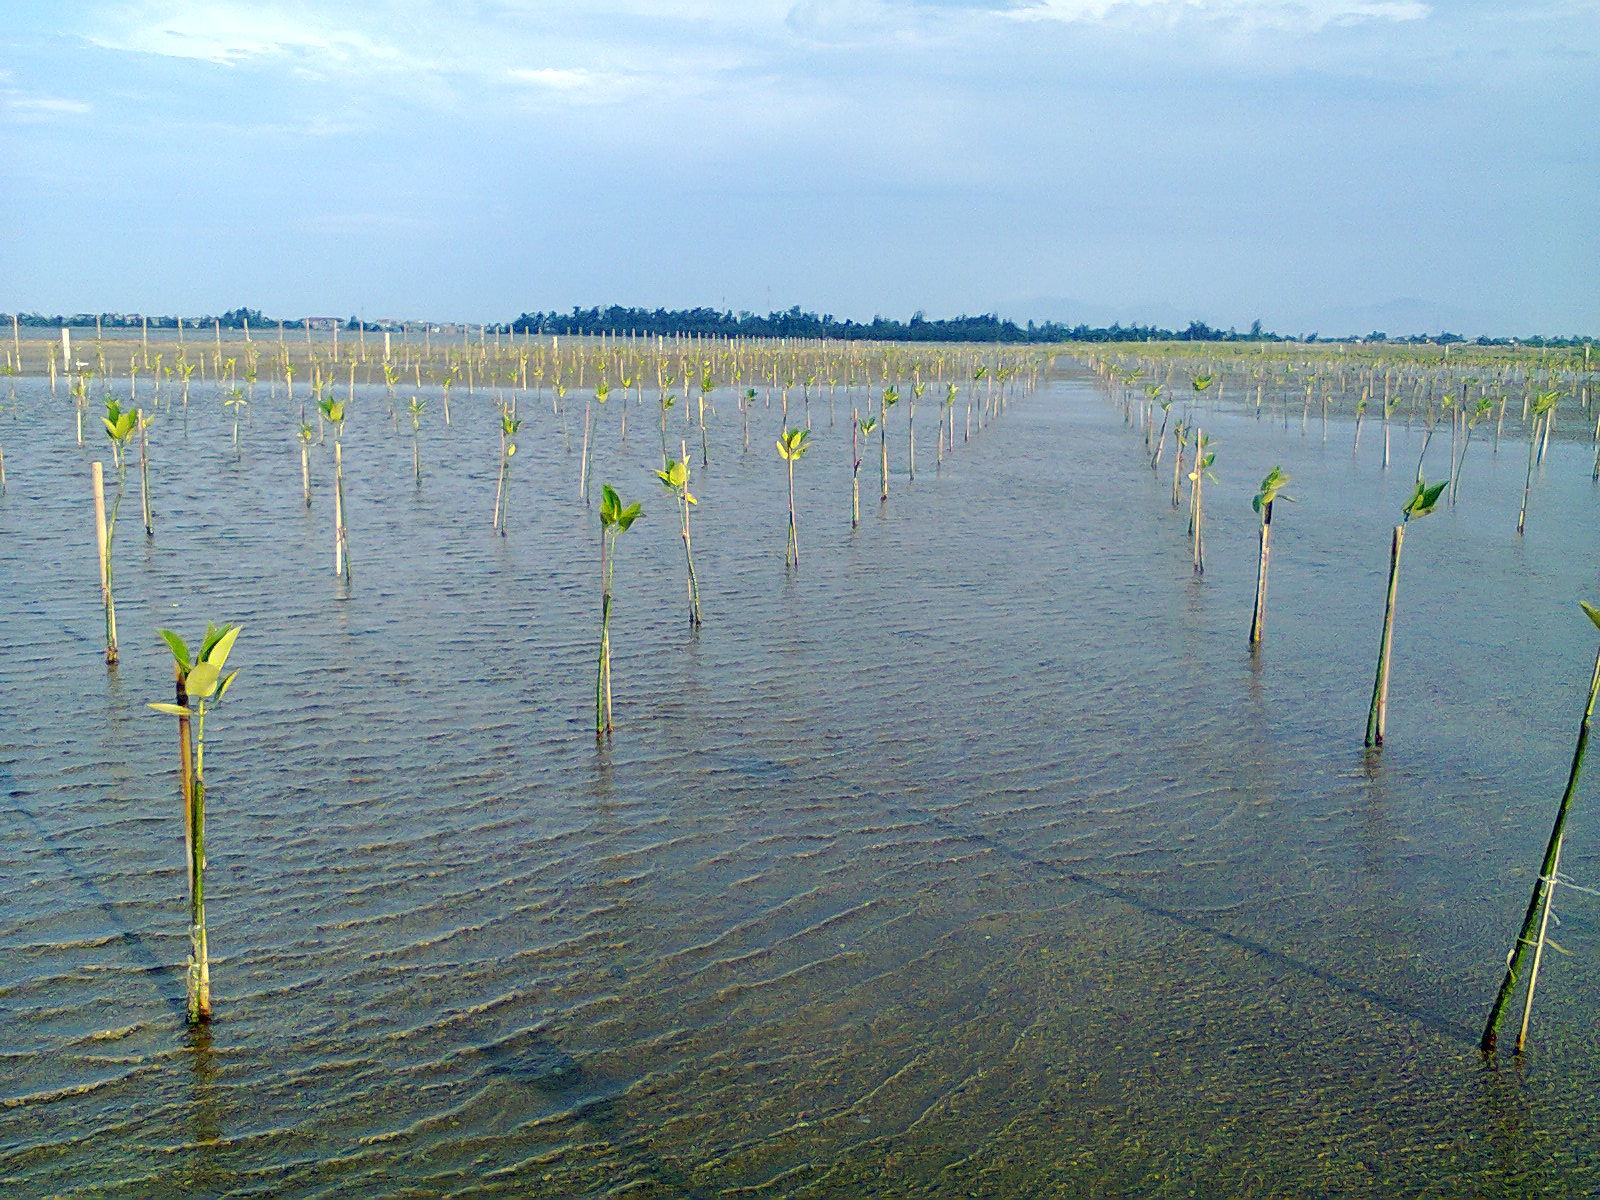 Planted mangroves in the Tam Giang Lagoon